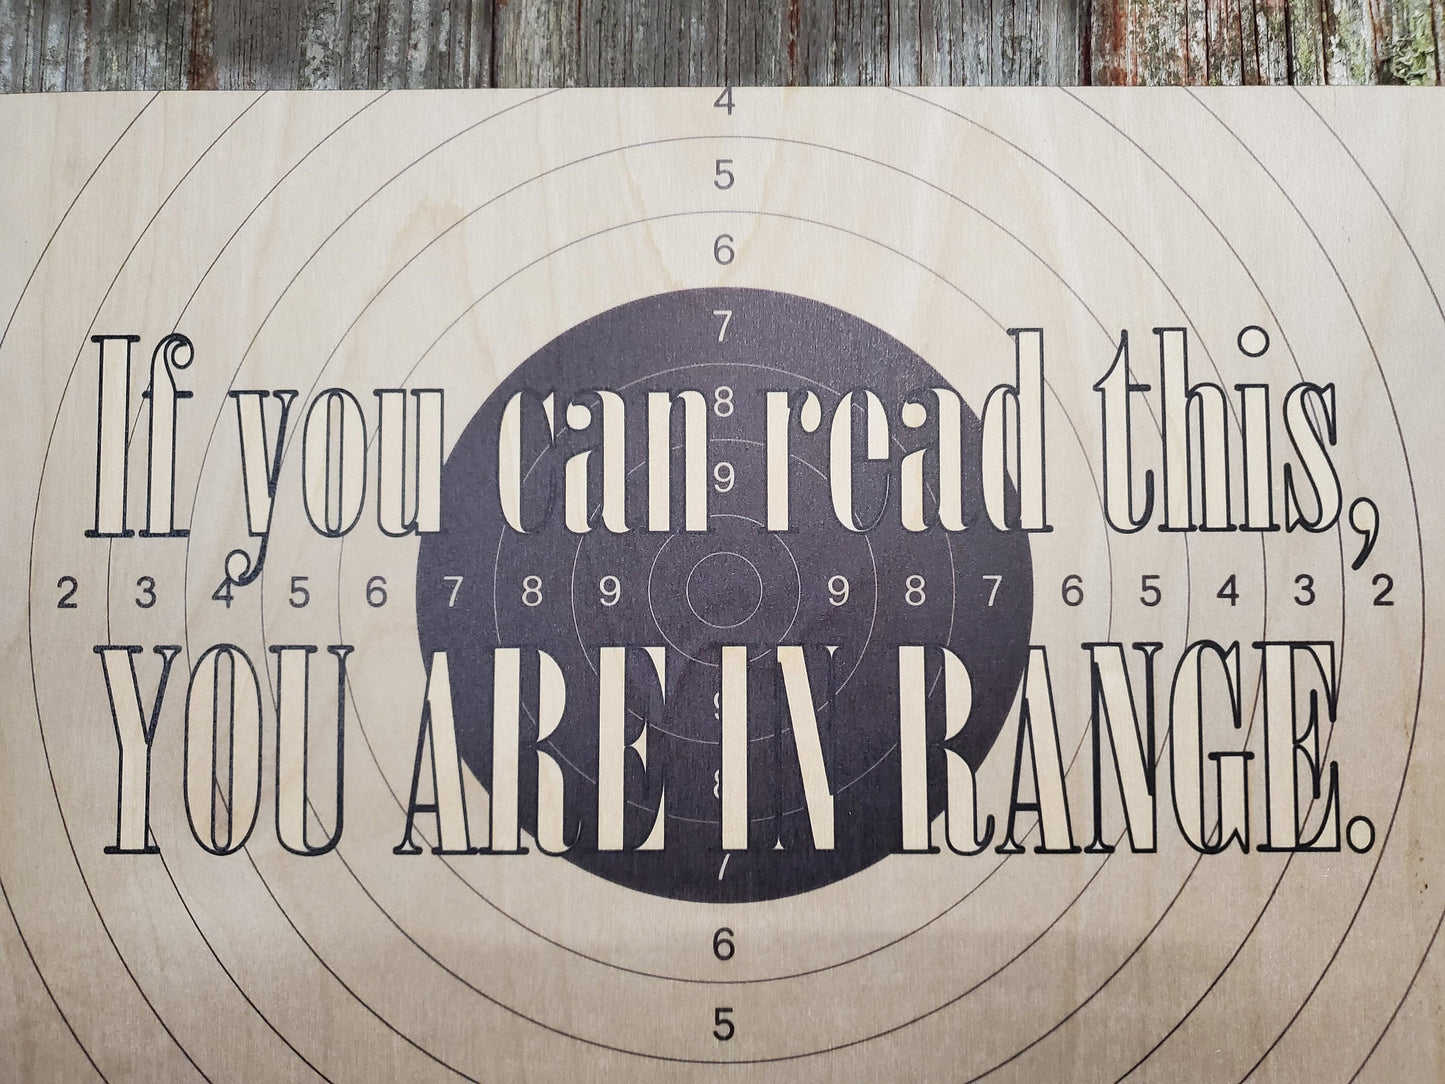 Gun Owner Sign If You Can Read this You Are in Range No Trespassing Sign Stay Out Wooden Front Door Entry Way Decor Plaque Wood Print